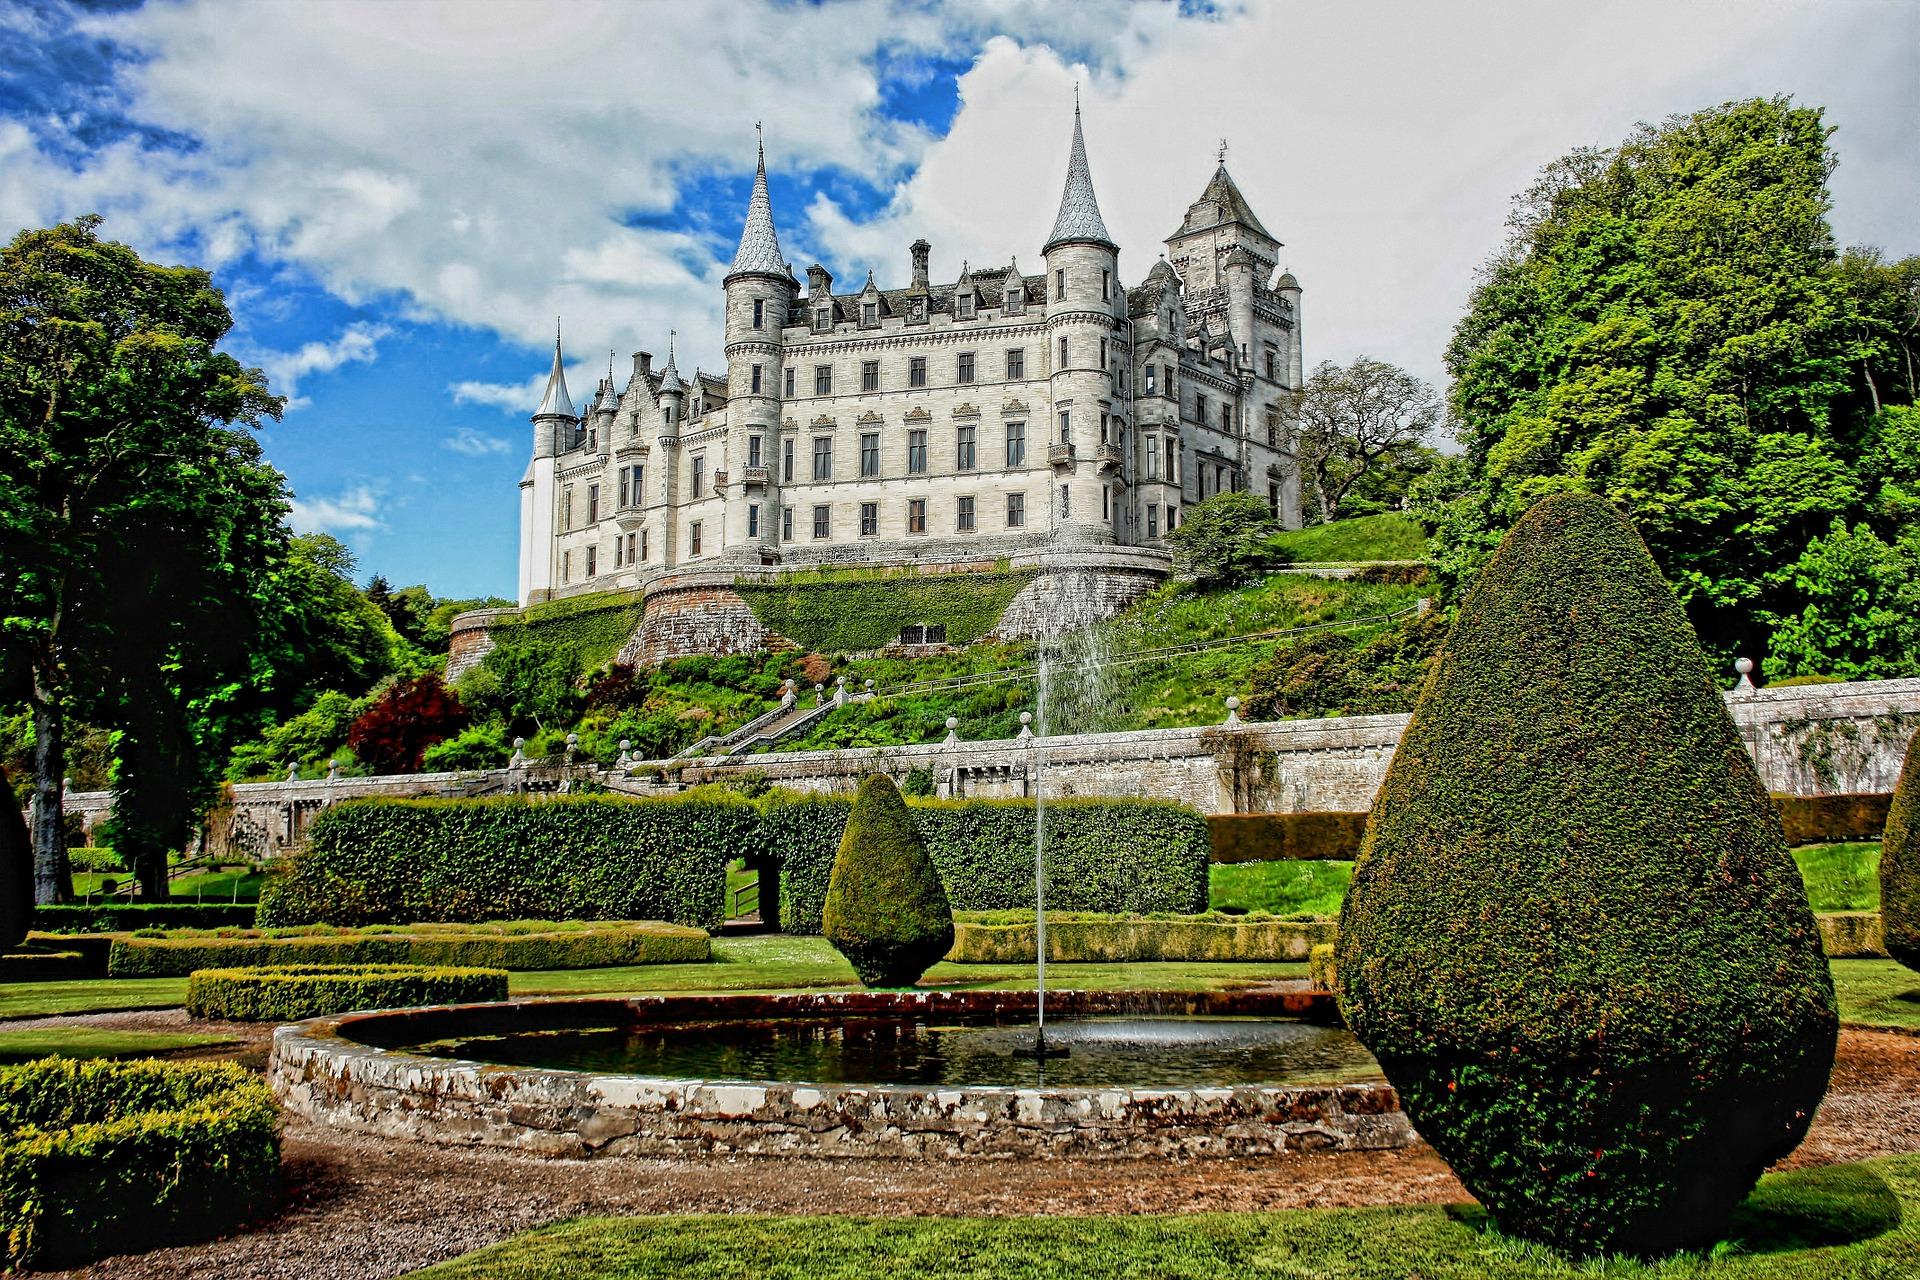 scotland tours with accommodation